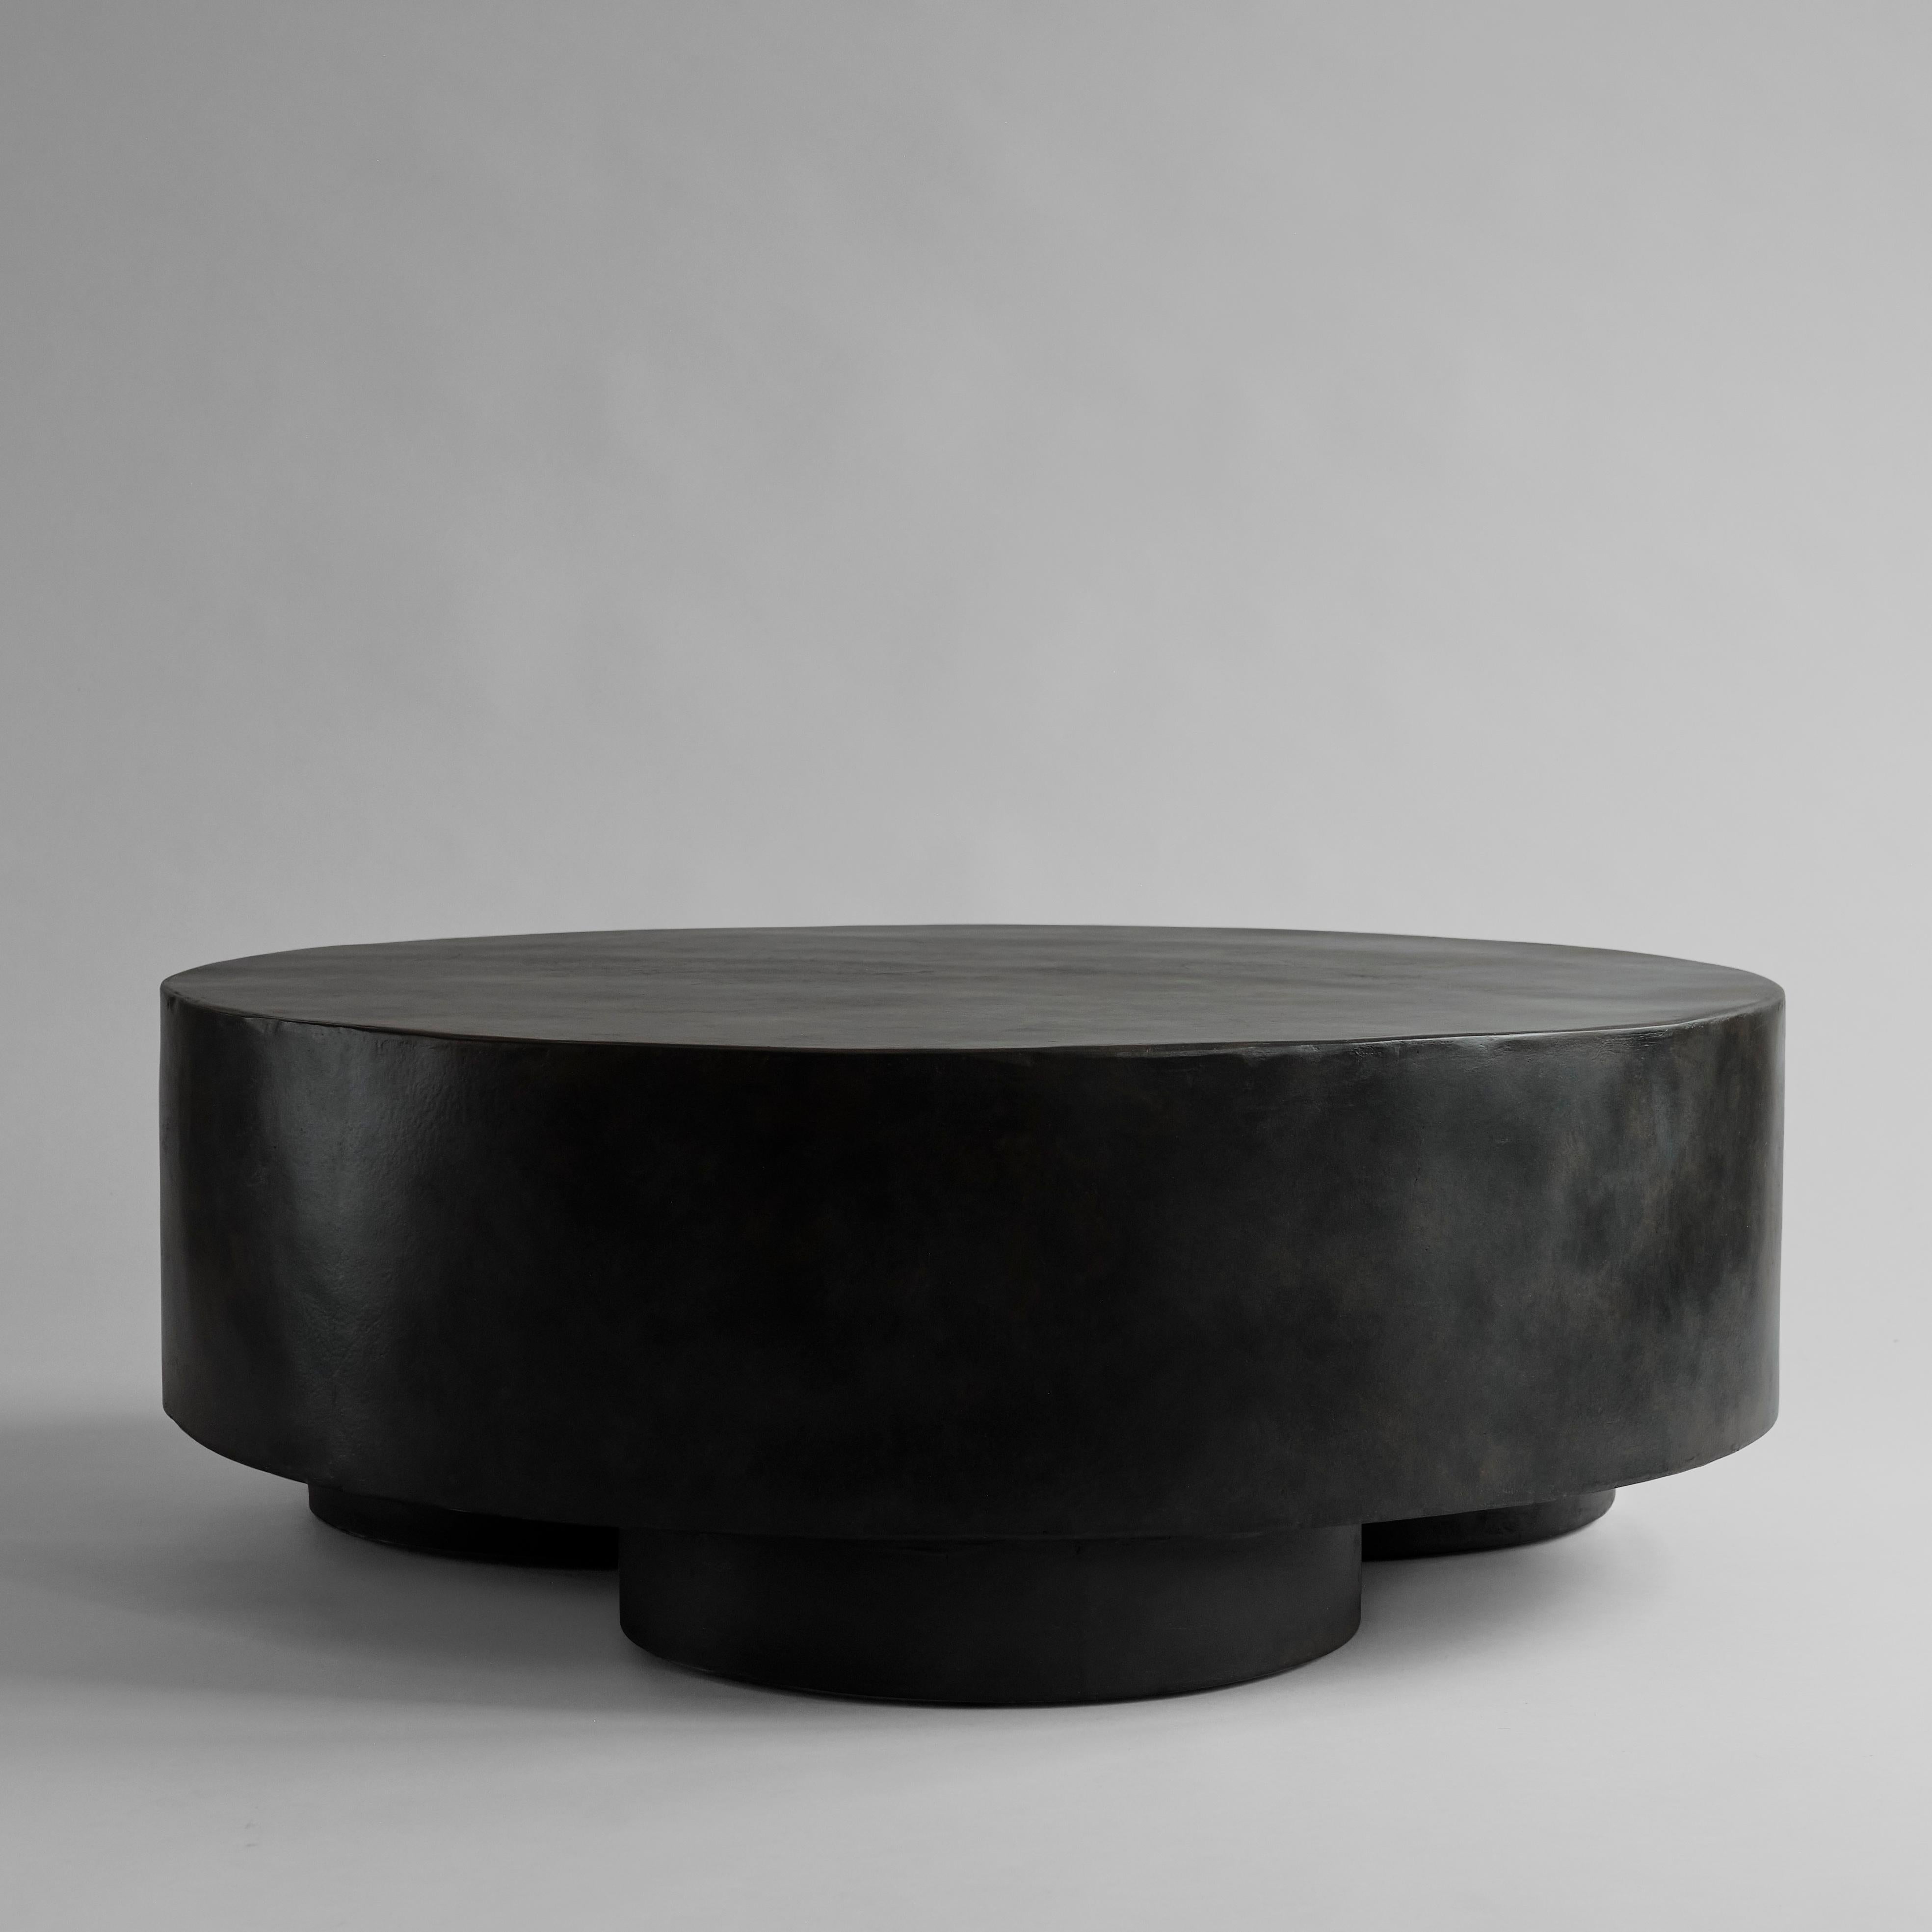 Big foot coffee table by 101 Copenhagen
Designed by Kristian Sofus Hansen & Tommy Hyldahl
Dimensions: L110 / W110 /H39 cm.
Materials: fiber concrete

At first glance the Big Foots collection looks heavy and dense, yet on further inspection, the